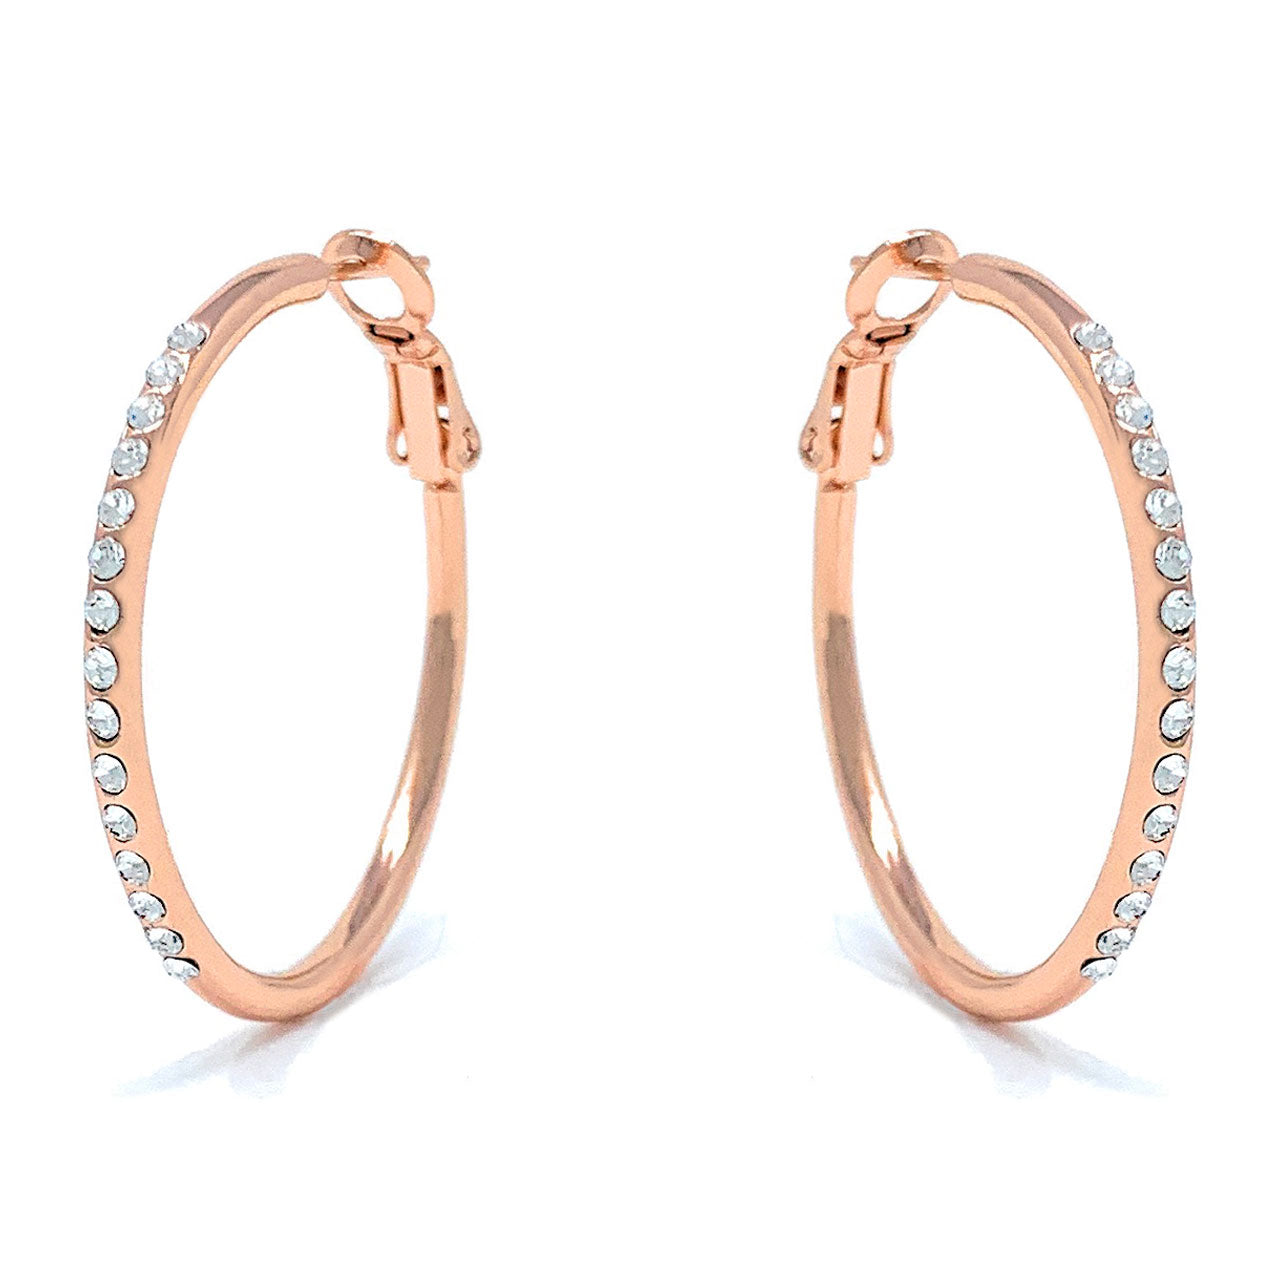 Amelia Small Pave Hoop Earrings with White Clear Round Crystals from Swarovski Rose Gold Plated - Ed Heart